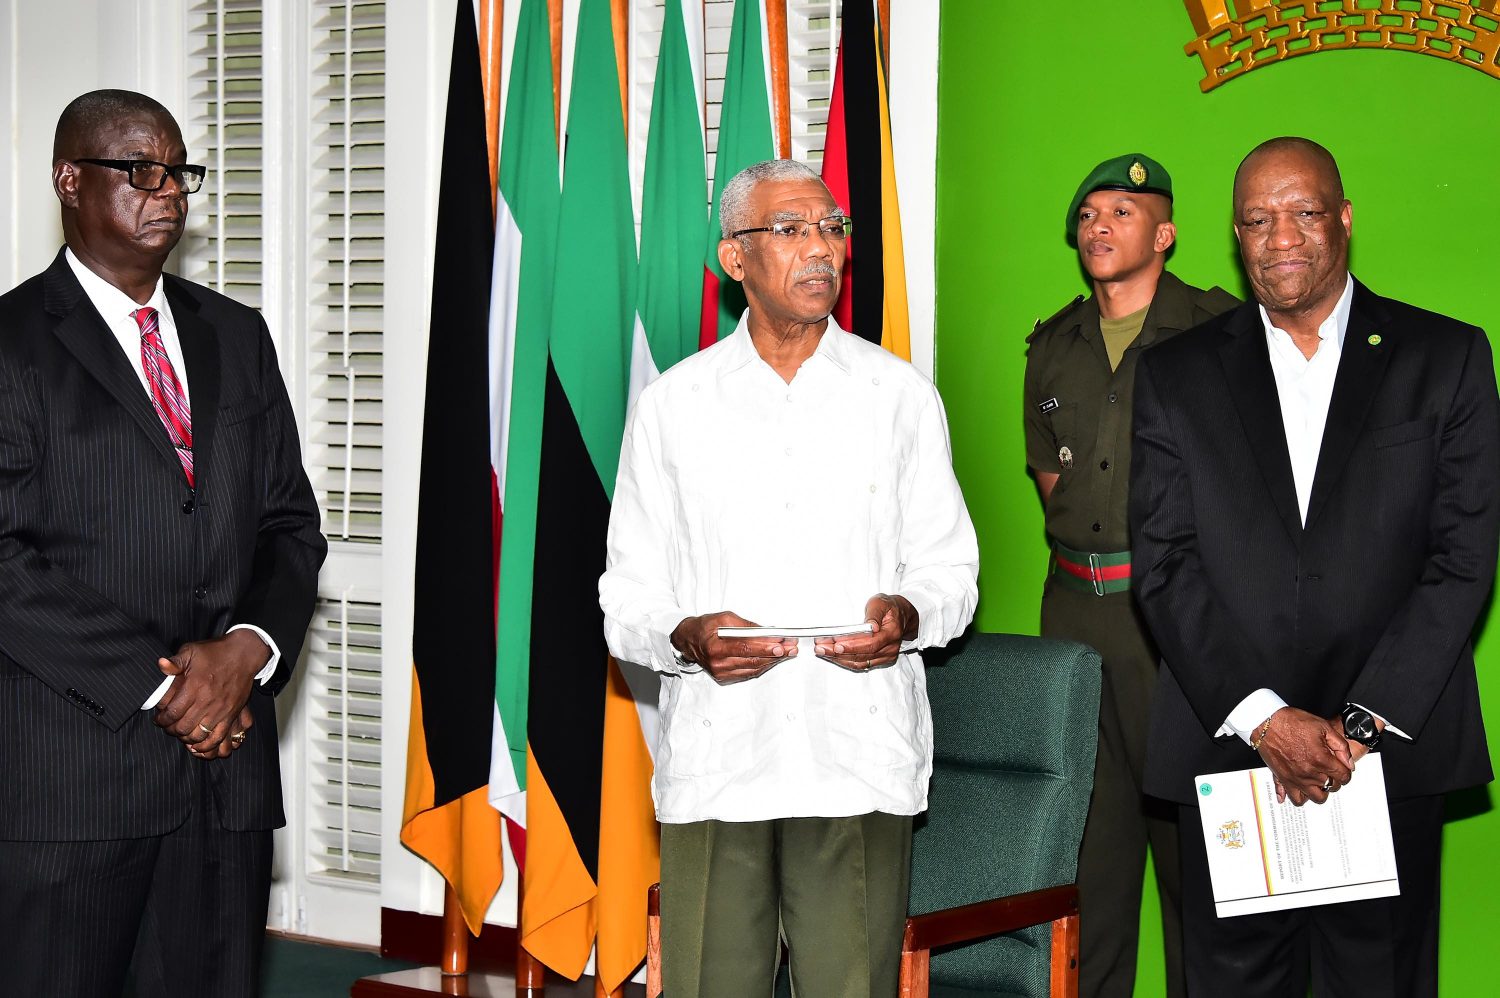 President David Granger (second from left) addressing members of the media after receiving the Report as Head of the Commission, Paul Slowe (left) and Minister of State, Joseph Harmon look on. (Ministry of the Presidency photo)